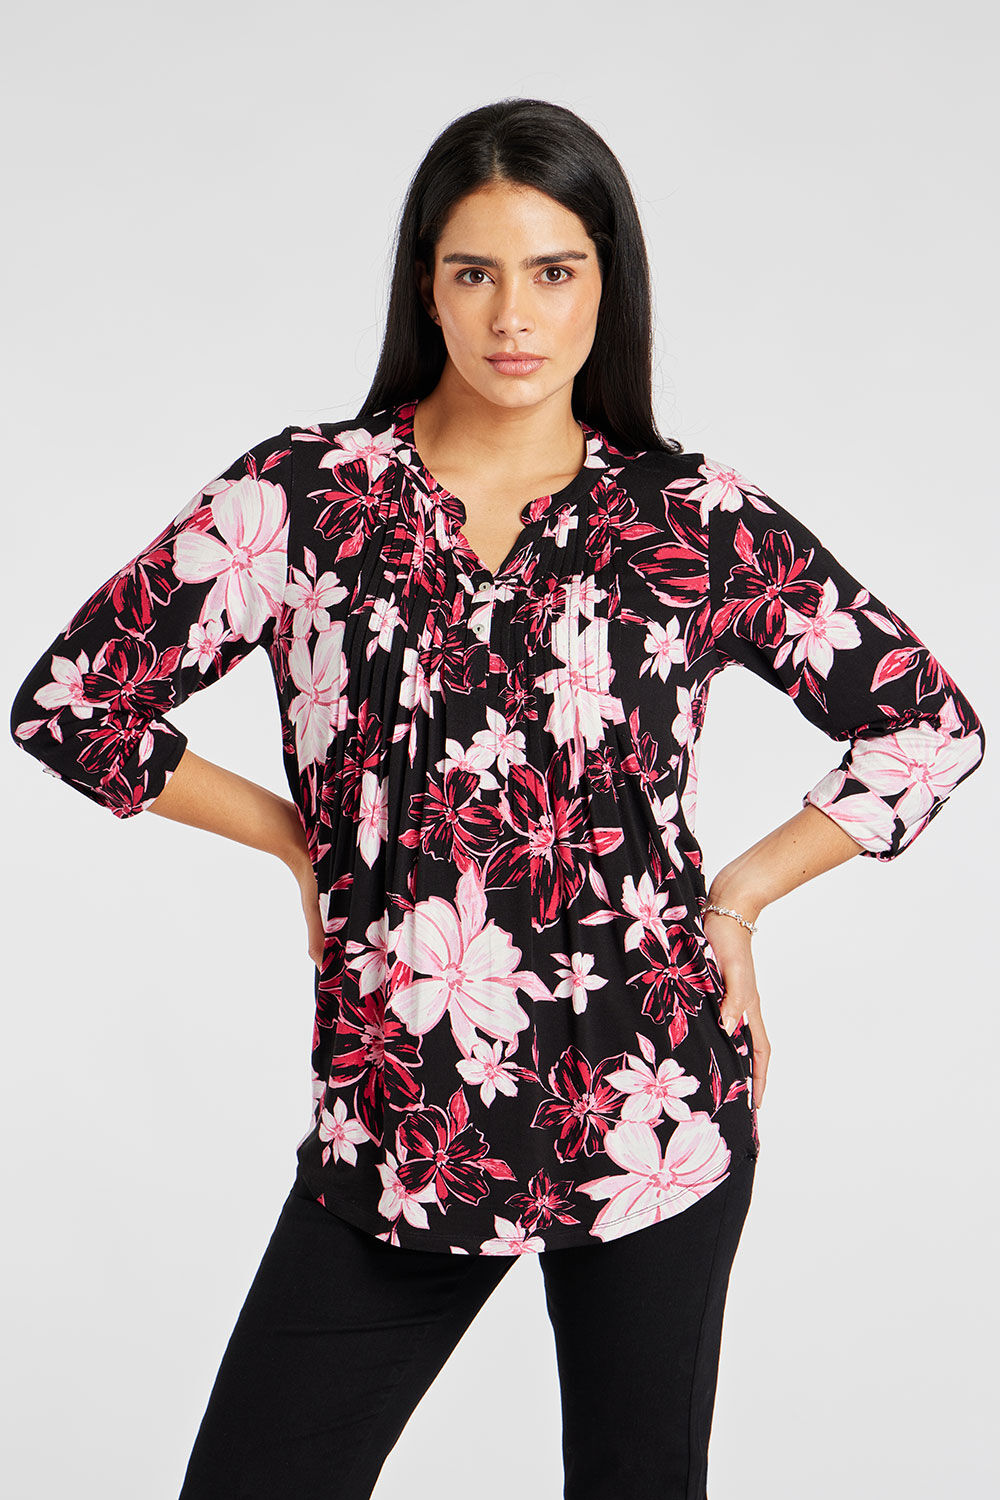 Bonmarche Black 3/4 Sleeve Large Floral Print Overhead Shirt With Pintuck Detail, Size: 10